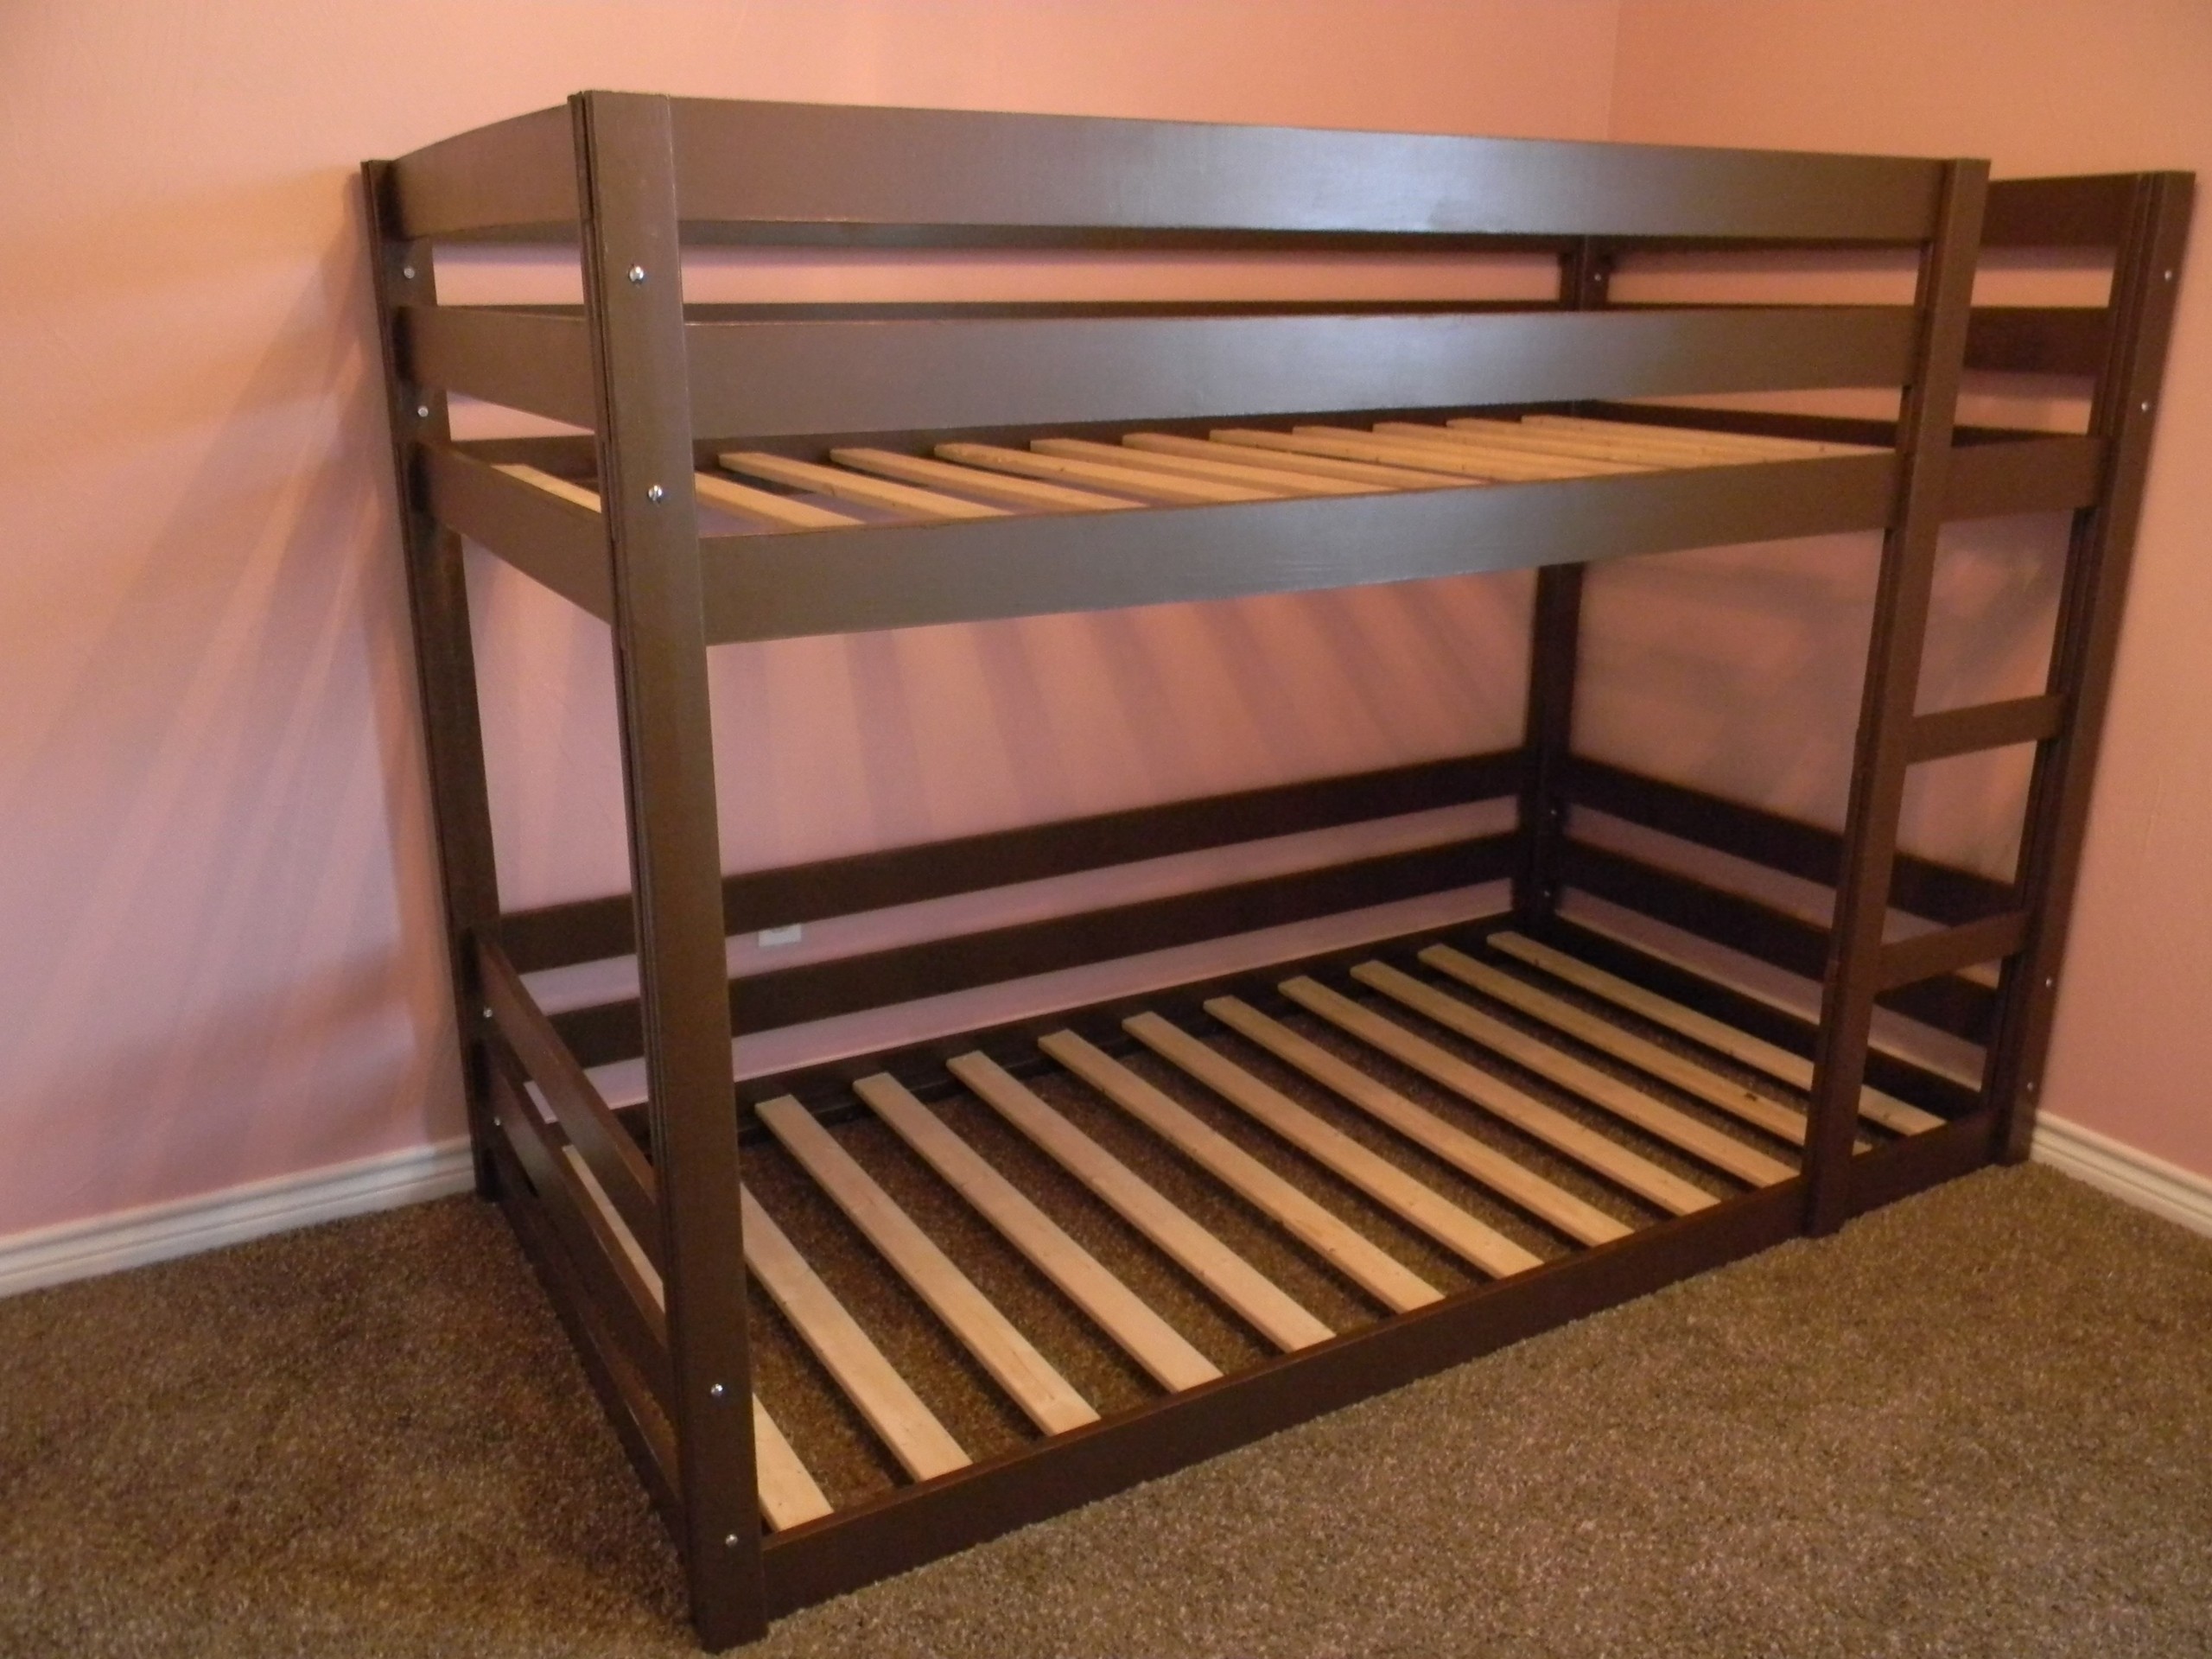 Lower bunk beds